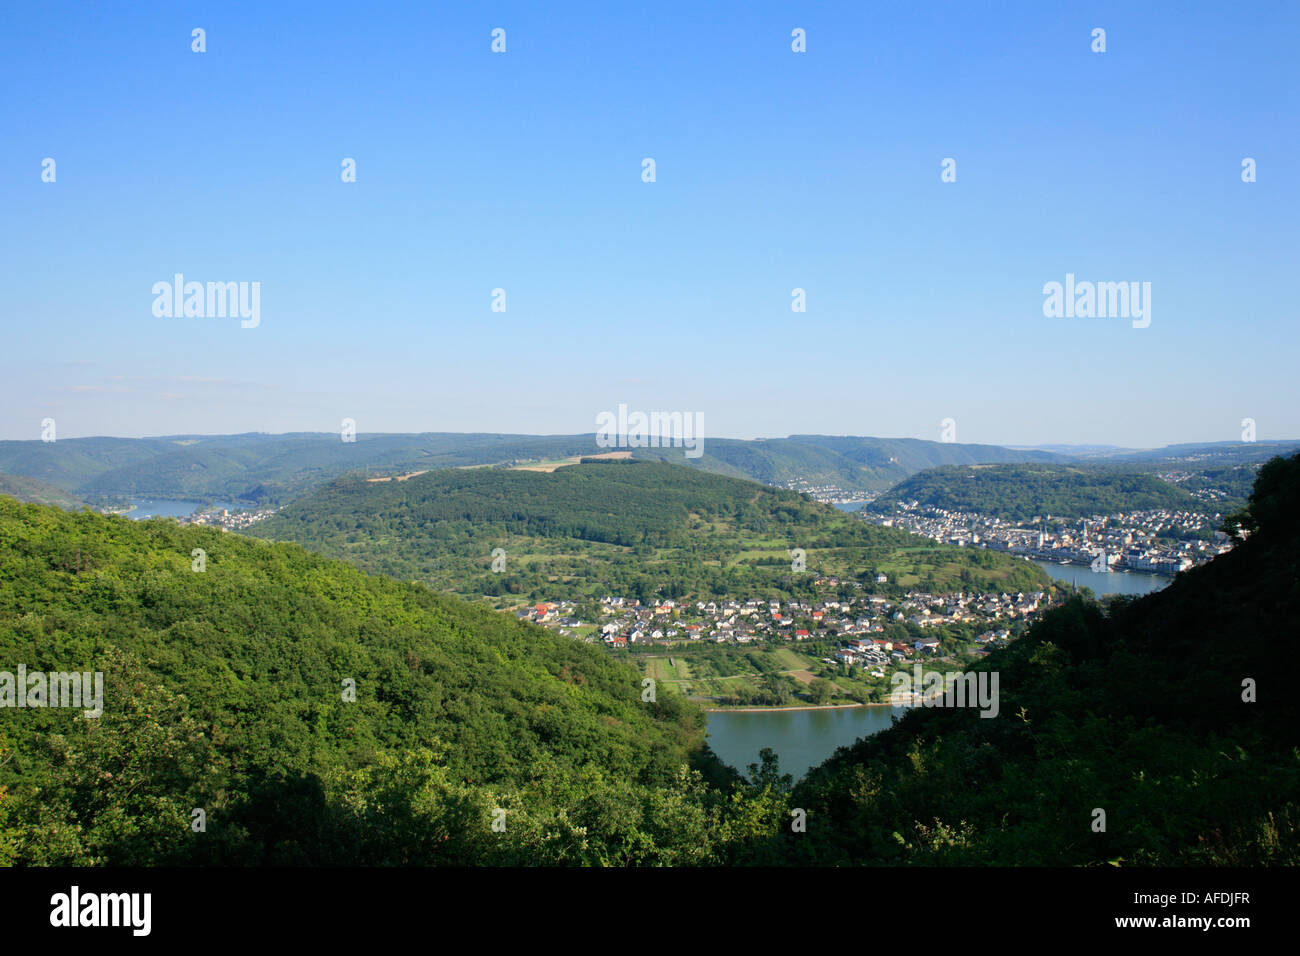 so called Vierseenblick (four lakes view) of the River Rhine near Boppard in Germany Stock Photo